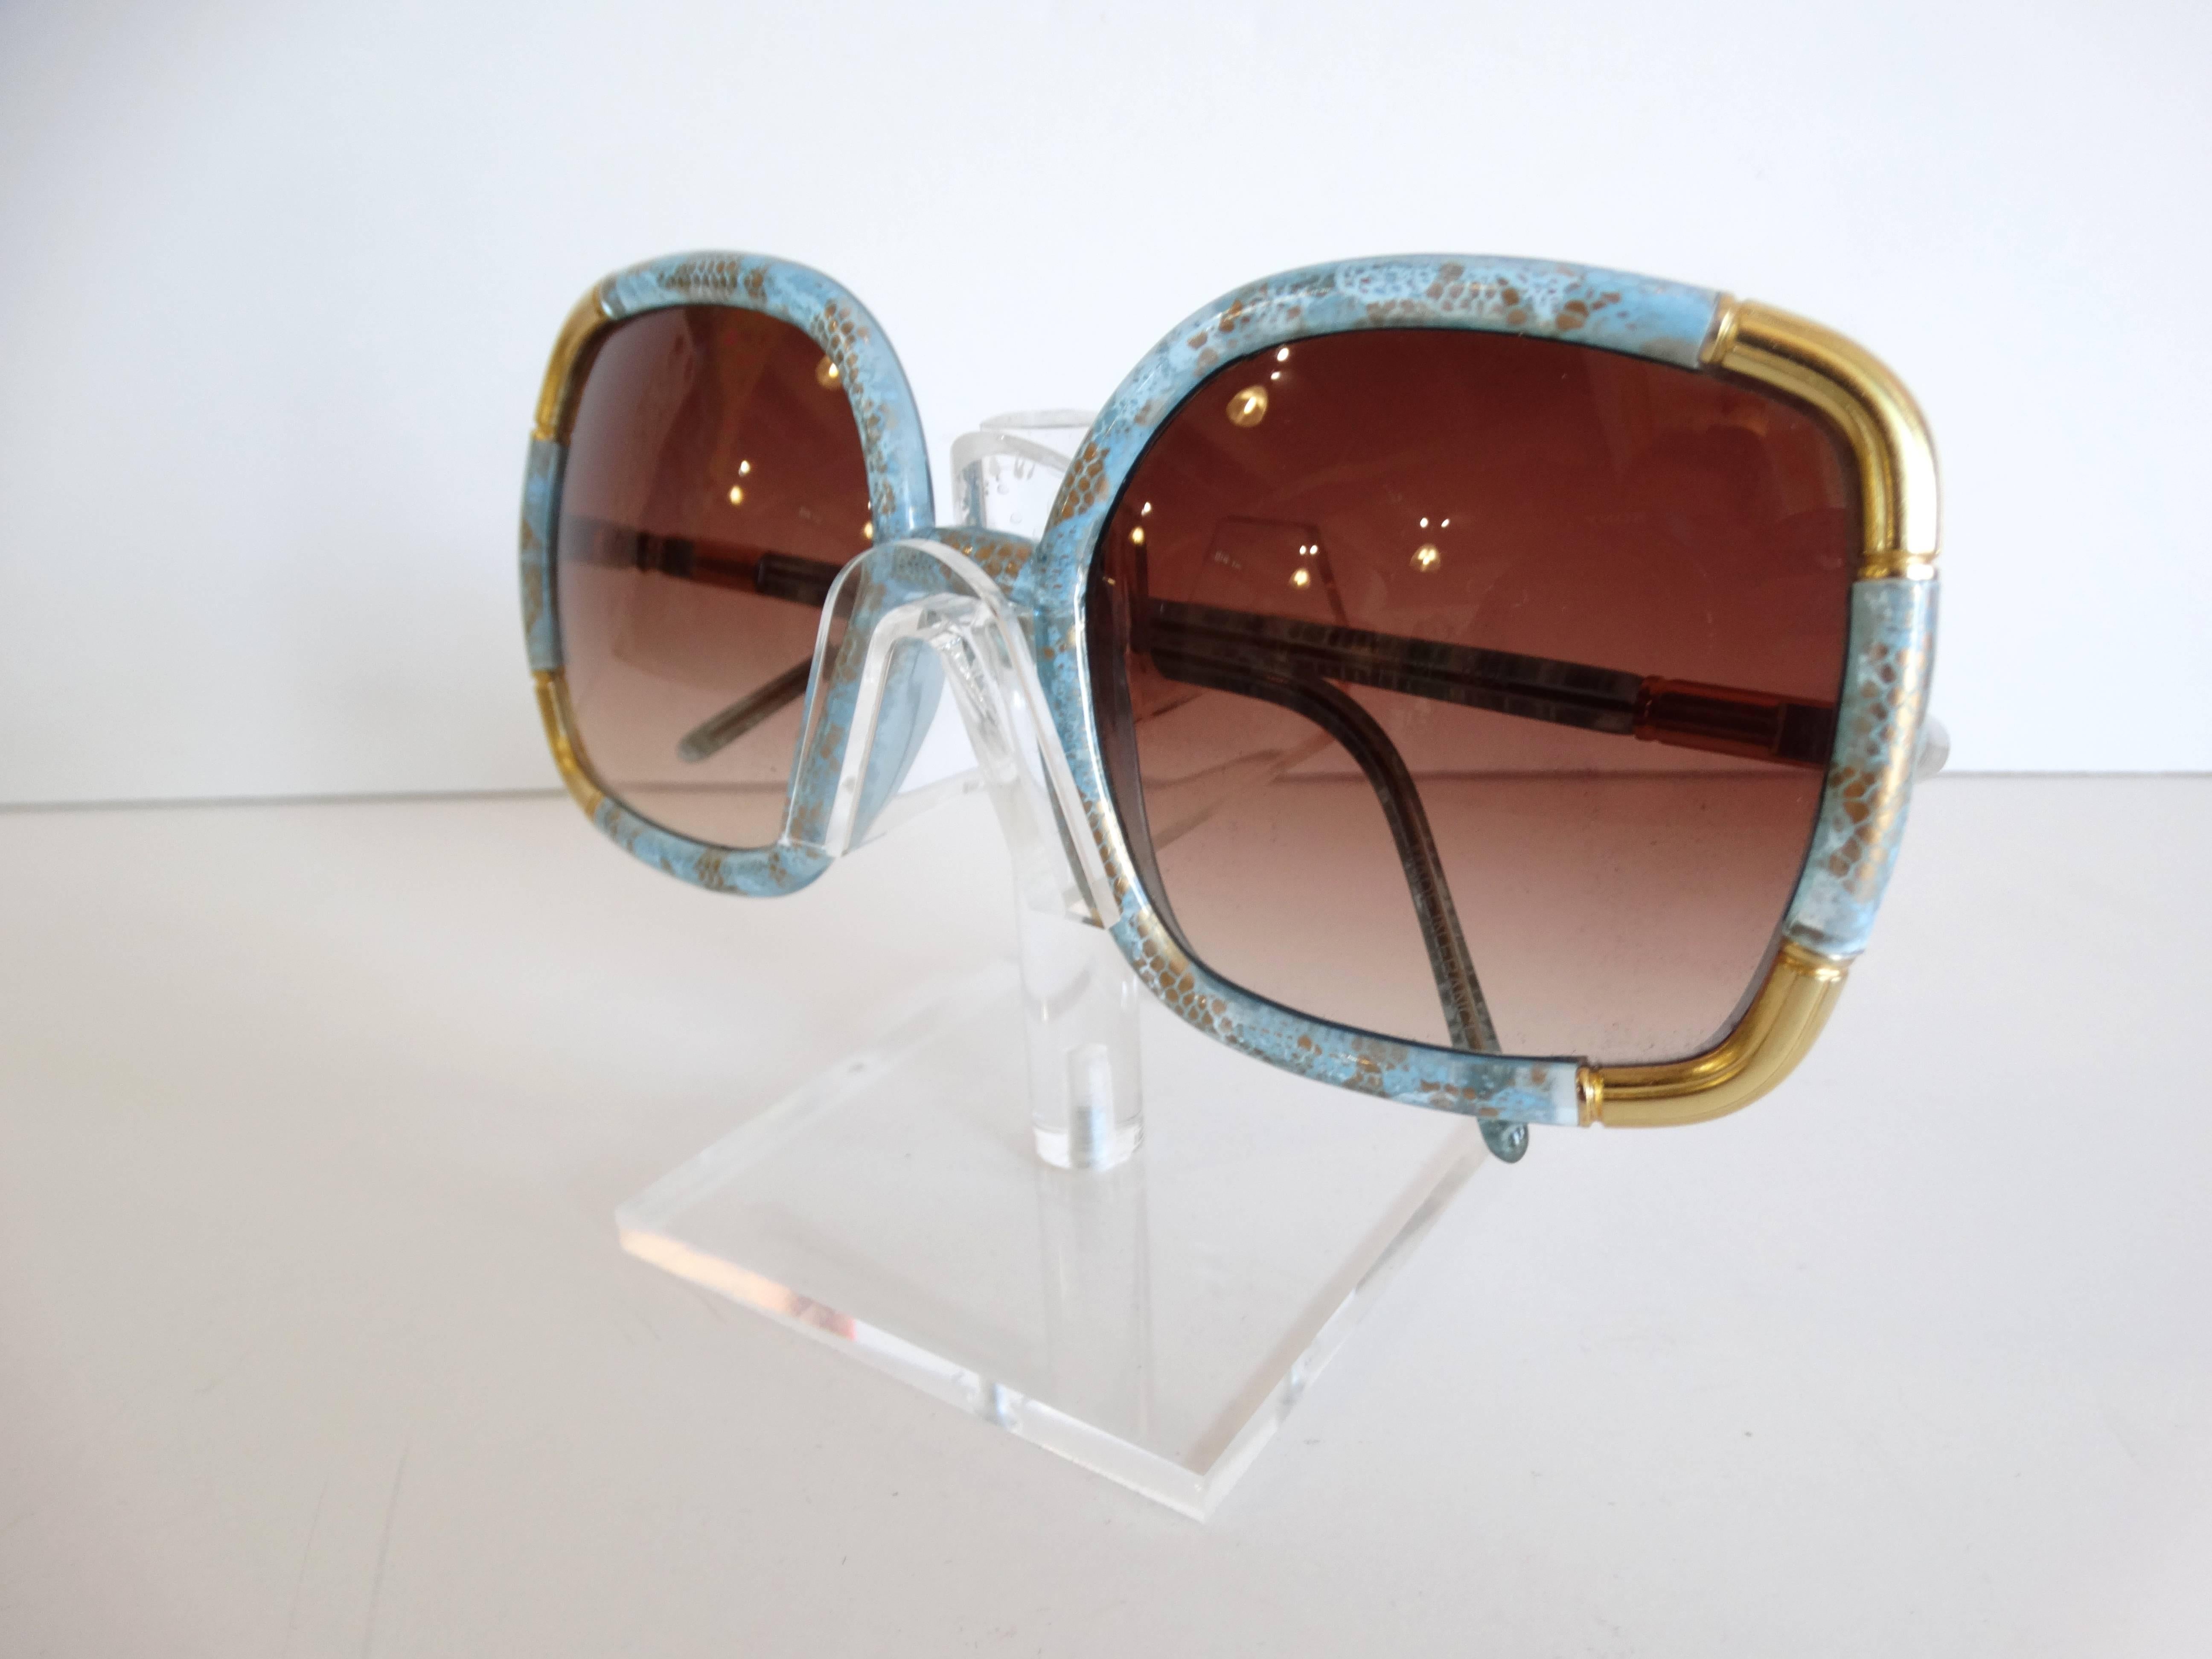 Super rare style of Ted Lapidus 1970's sunglasses. Blue gold lace print sunglasses with gold accents. 
Signed Ted Lapidus Paris. 